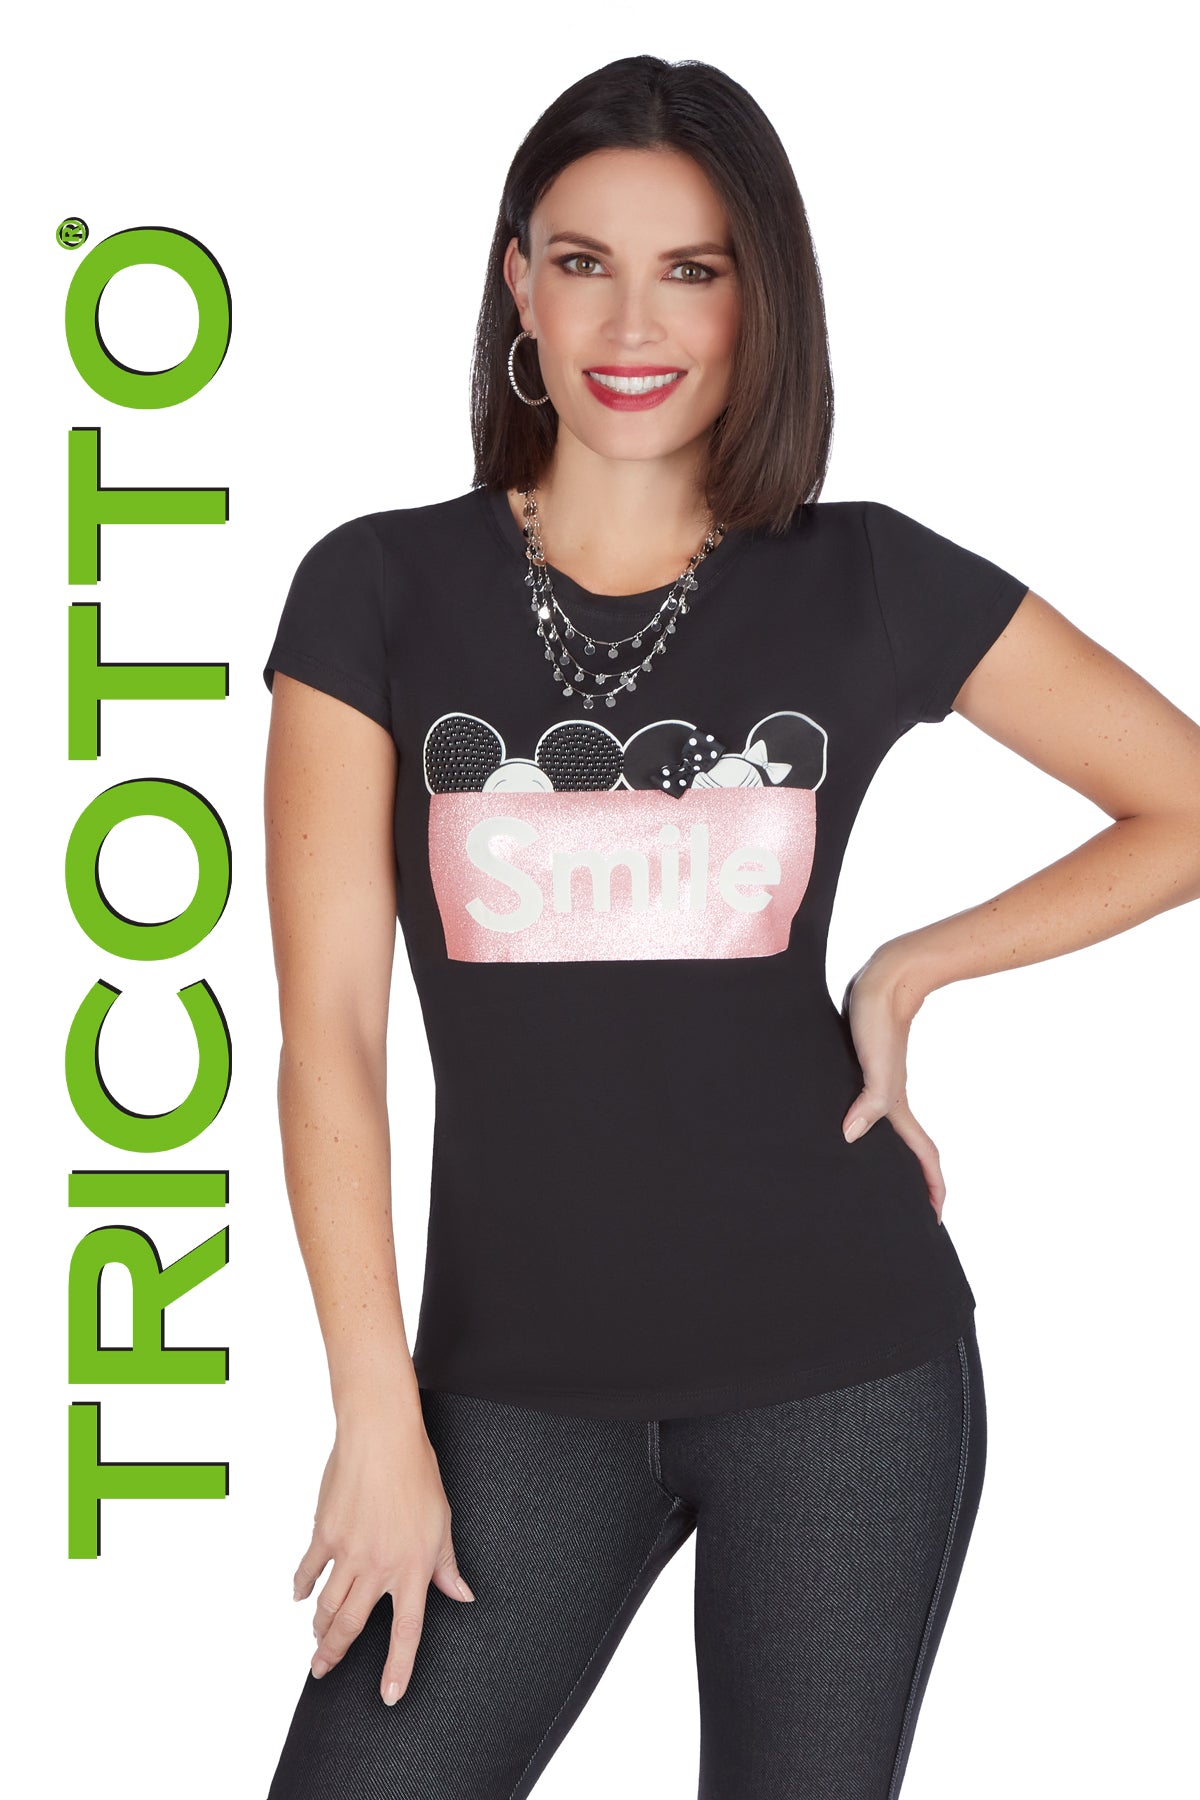 Tricotto T-shirts-Buy Tricotto T-shirts Online-Tricotto Clothing Quebec-Tricotto Online T-shirt Shop-Tricotto Clothing Montreal-Tricotto Online Shop